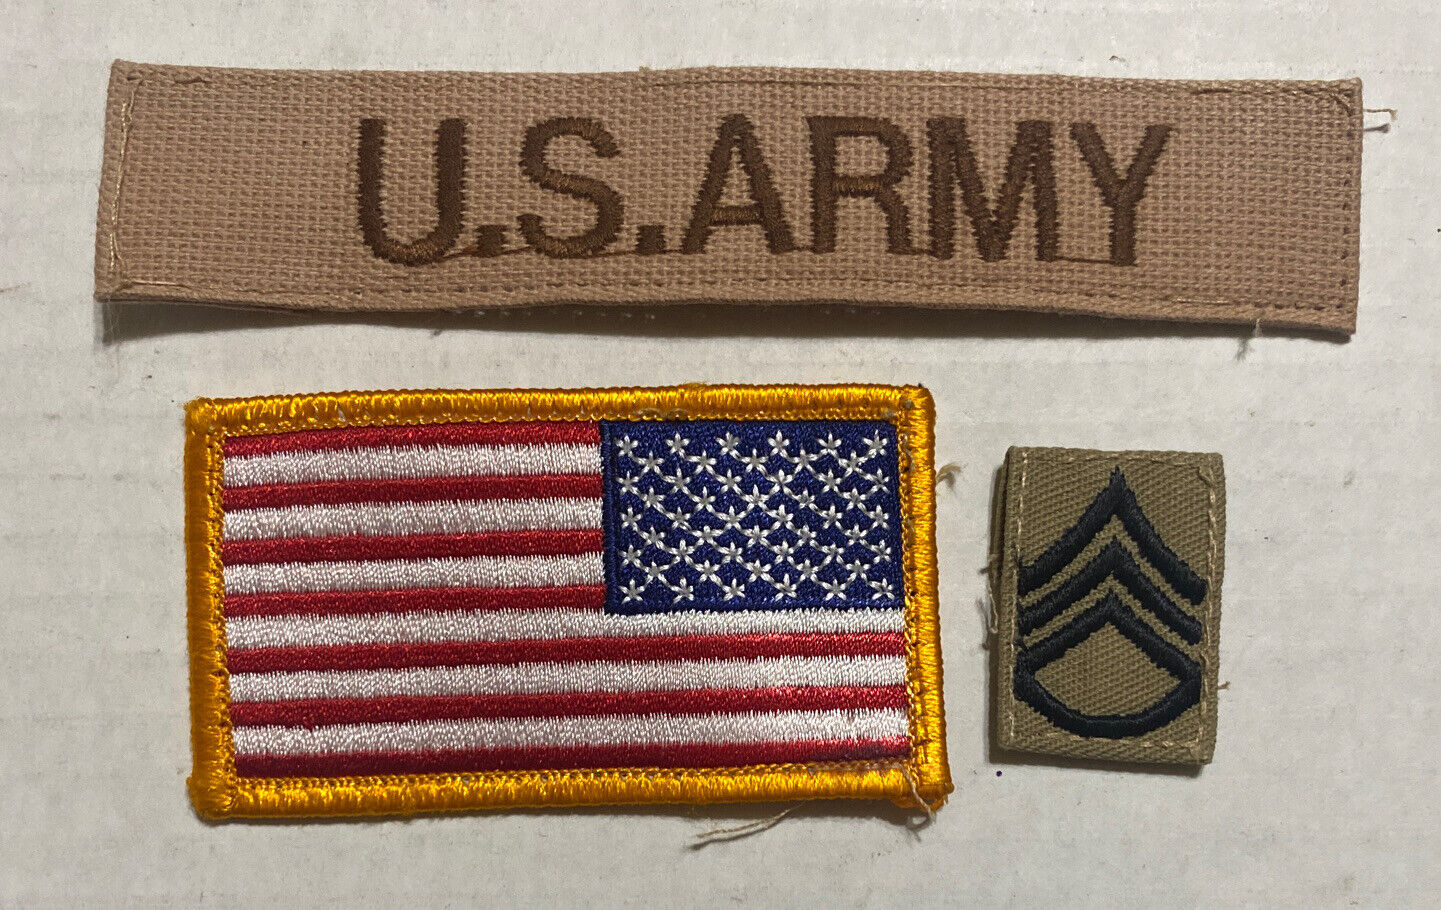 Group Of 3 Desert Tan US Army Patches - Staff Sergeant Rank U.S. Flag U.S. Army